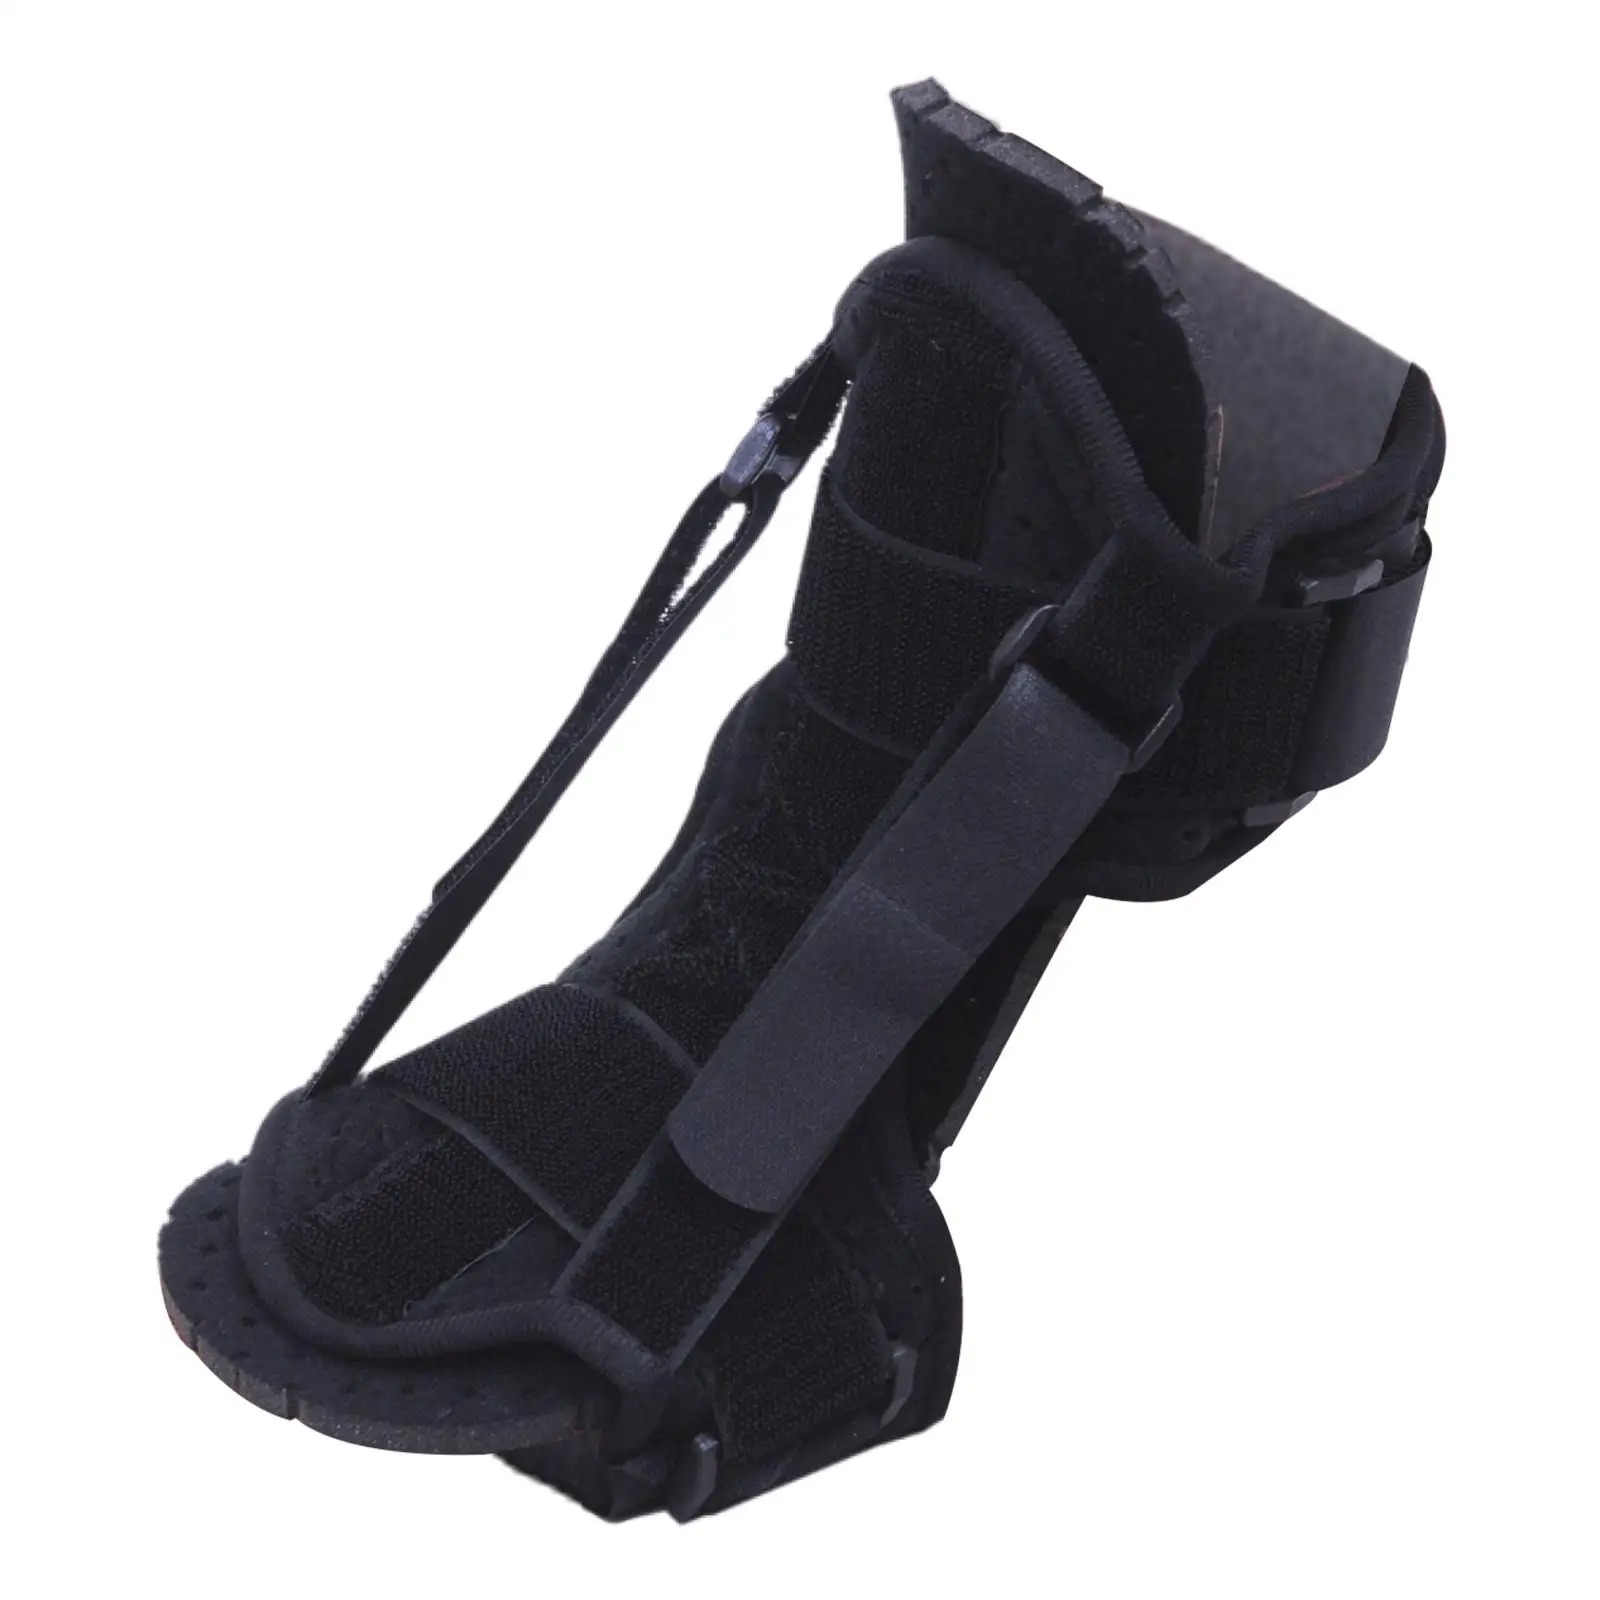   Built  Plate Relieve  Sleeping Immobilizer  Foot Drop Brace Double Fixing Straps